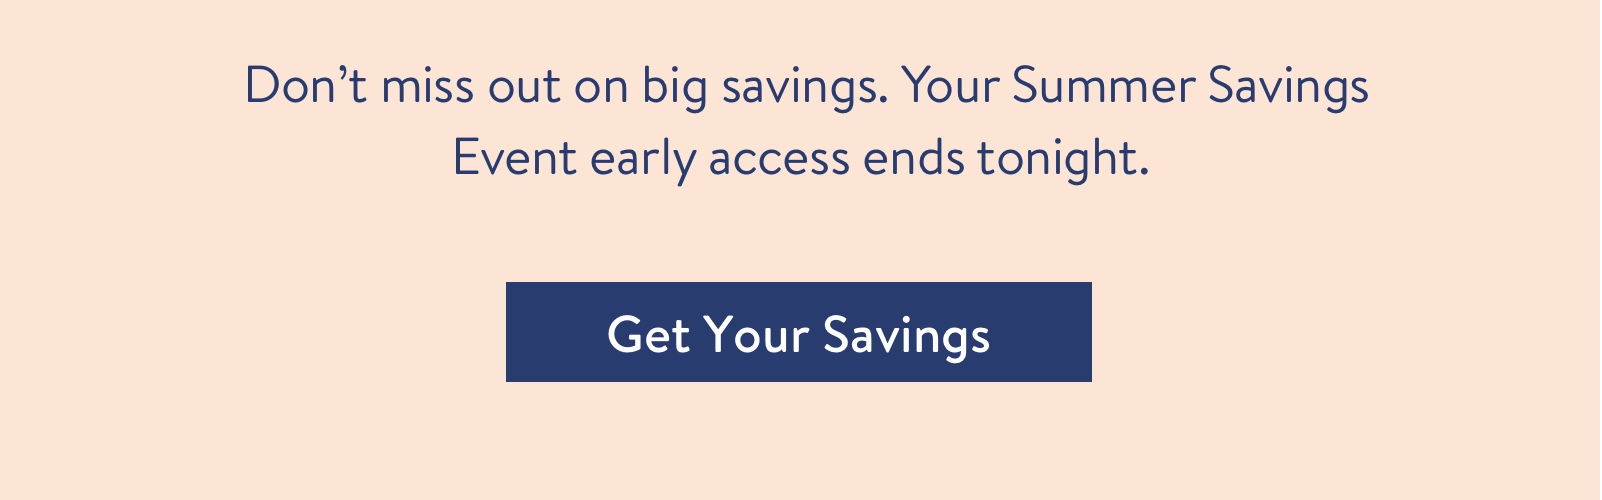 Don't miss out on big savings. Your Summer Savings Event early access ends tonight.